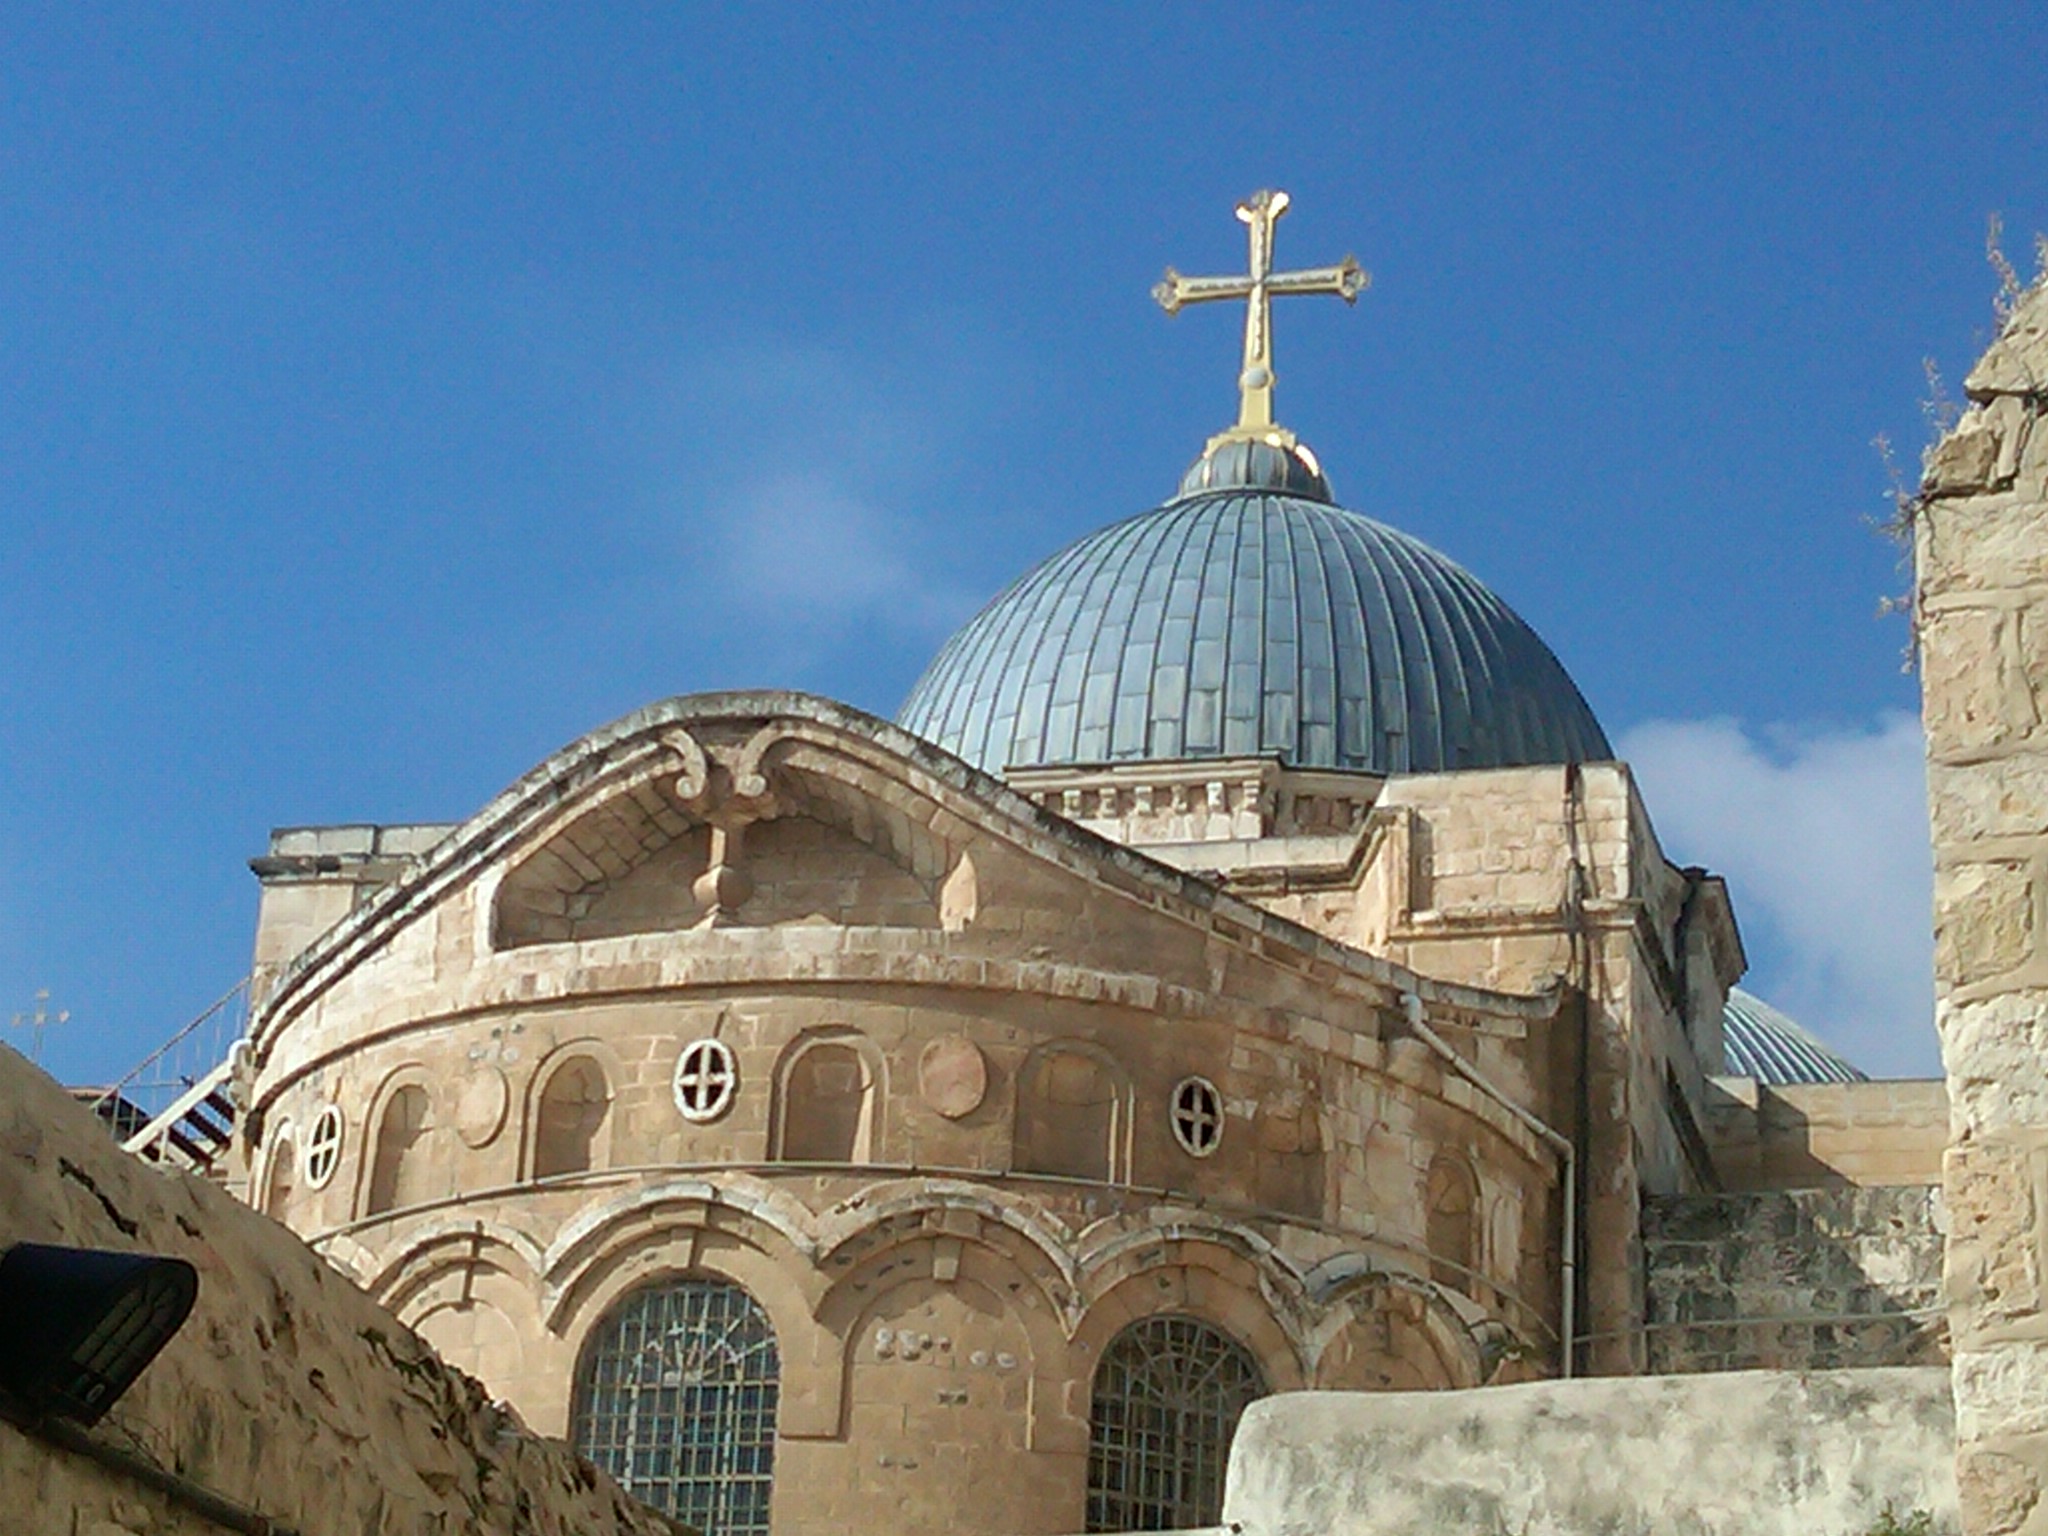 The Church of the HOly Sepulchre